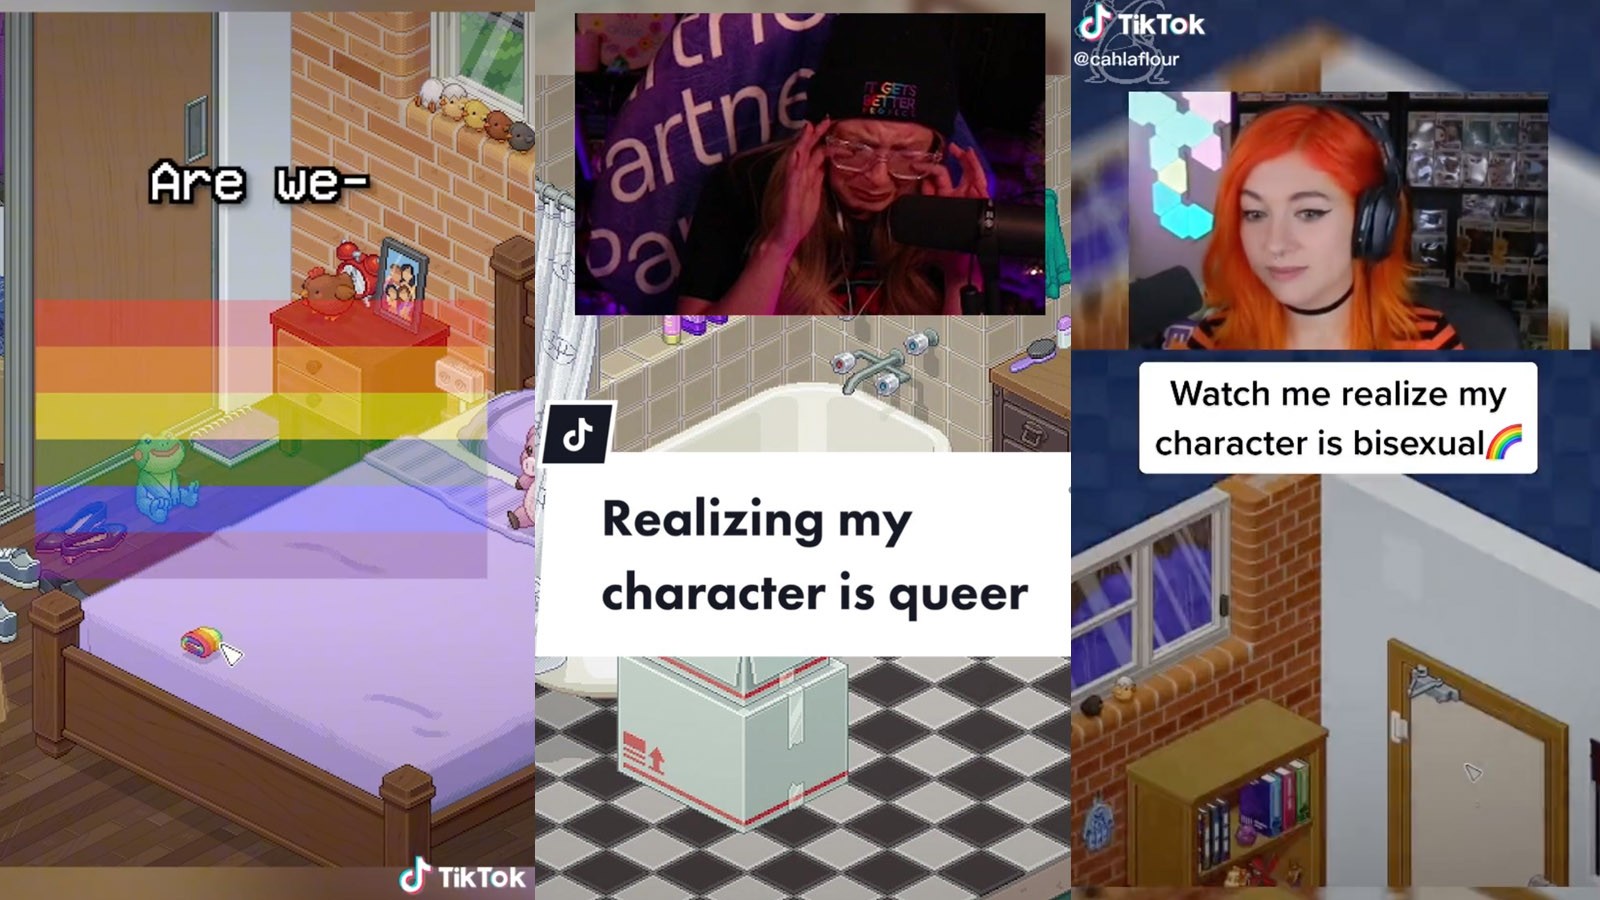 Break The Game Looks for Queer Community in A 8-bit World